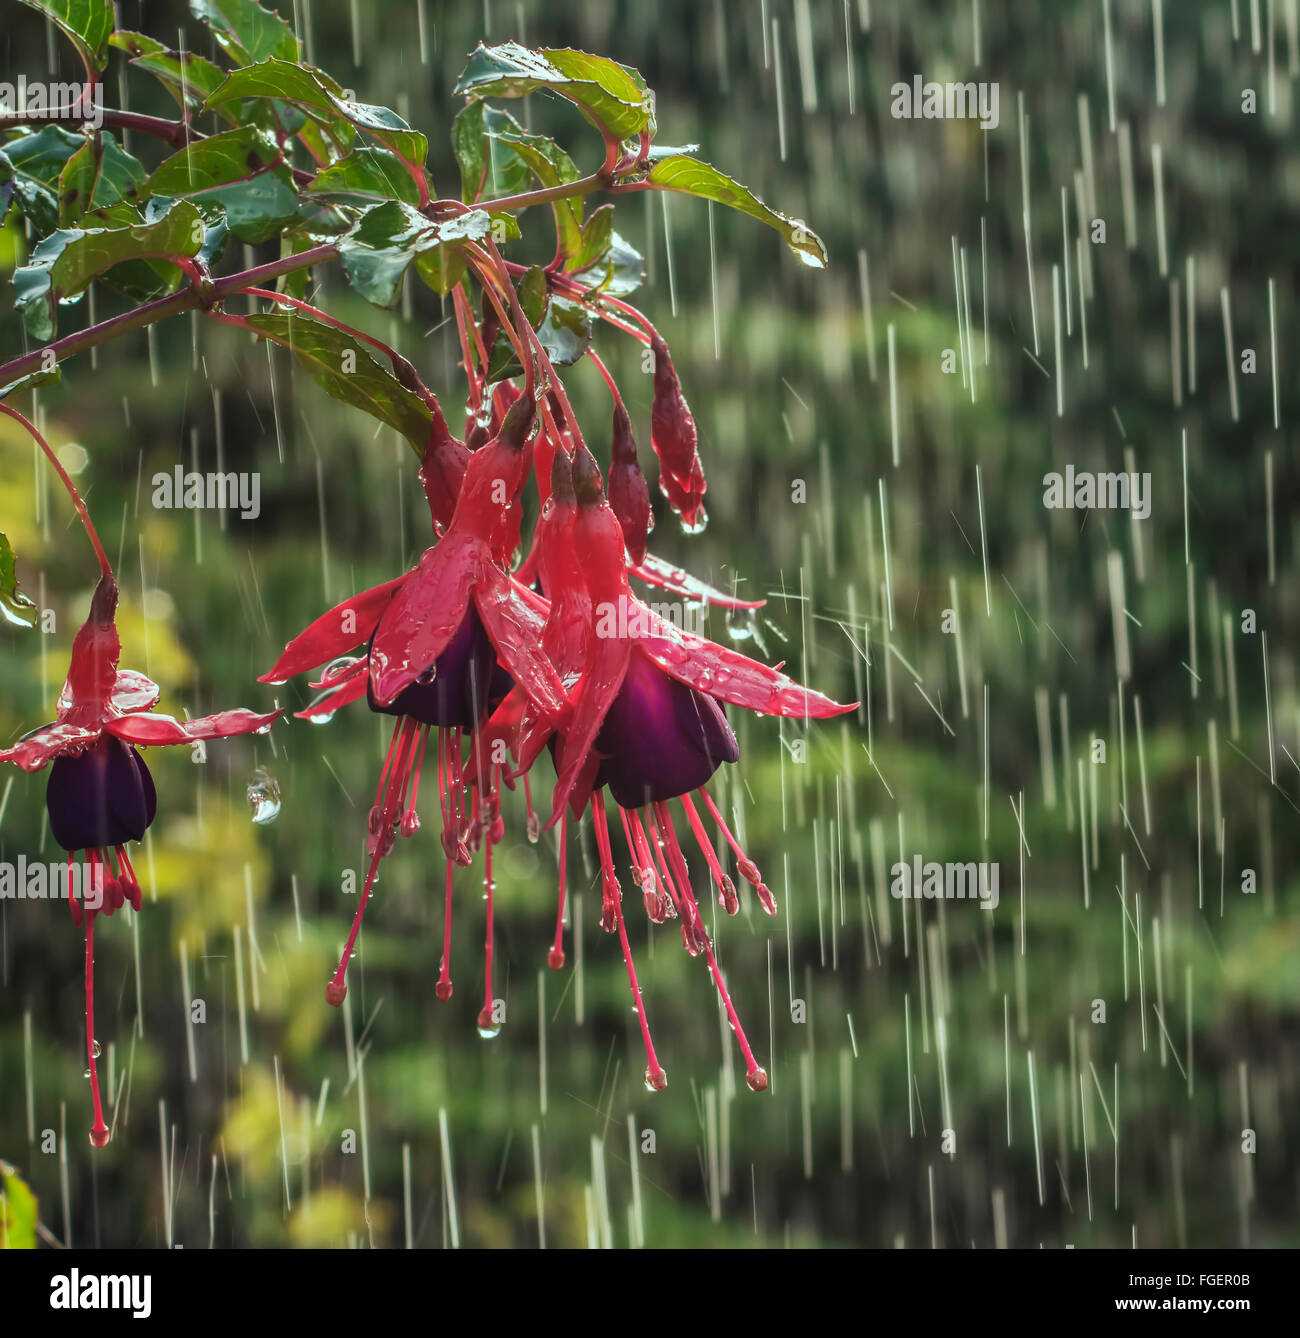 Fuchsia flower dripping with water in the rain of a British summer. Stock Photo